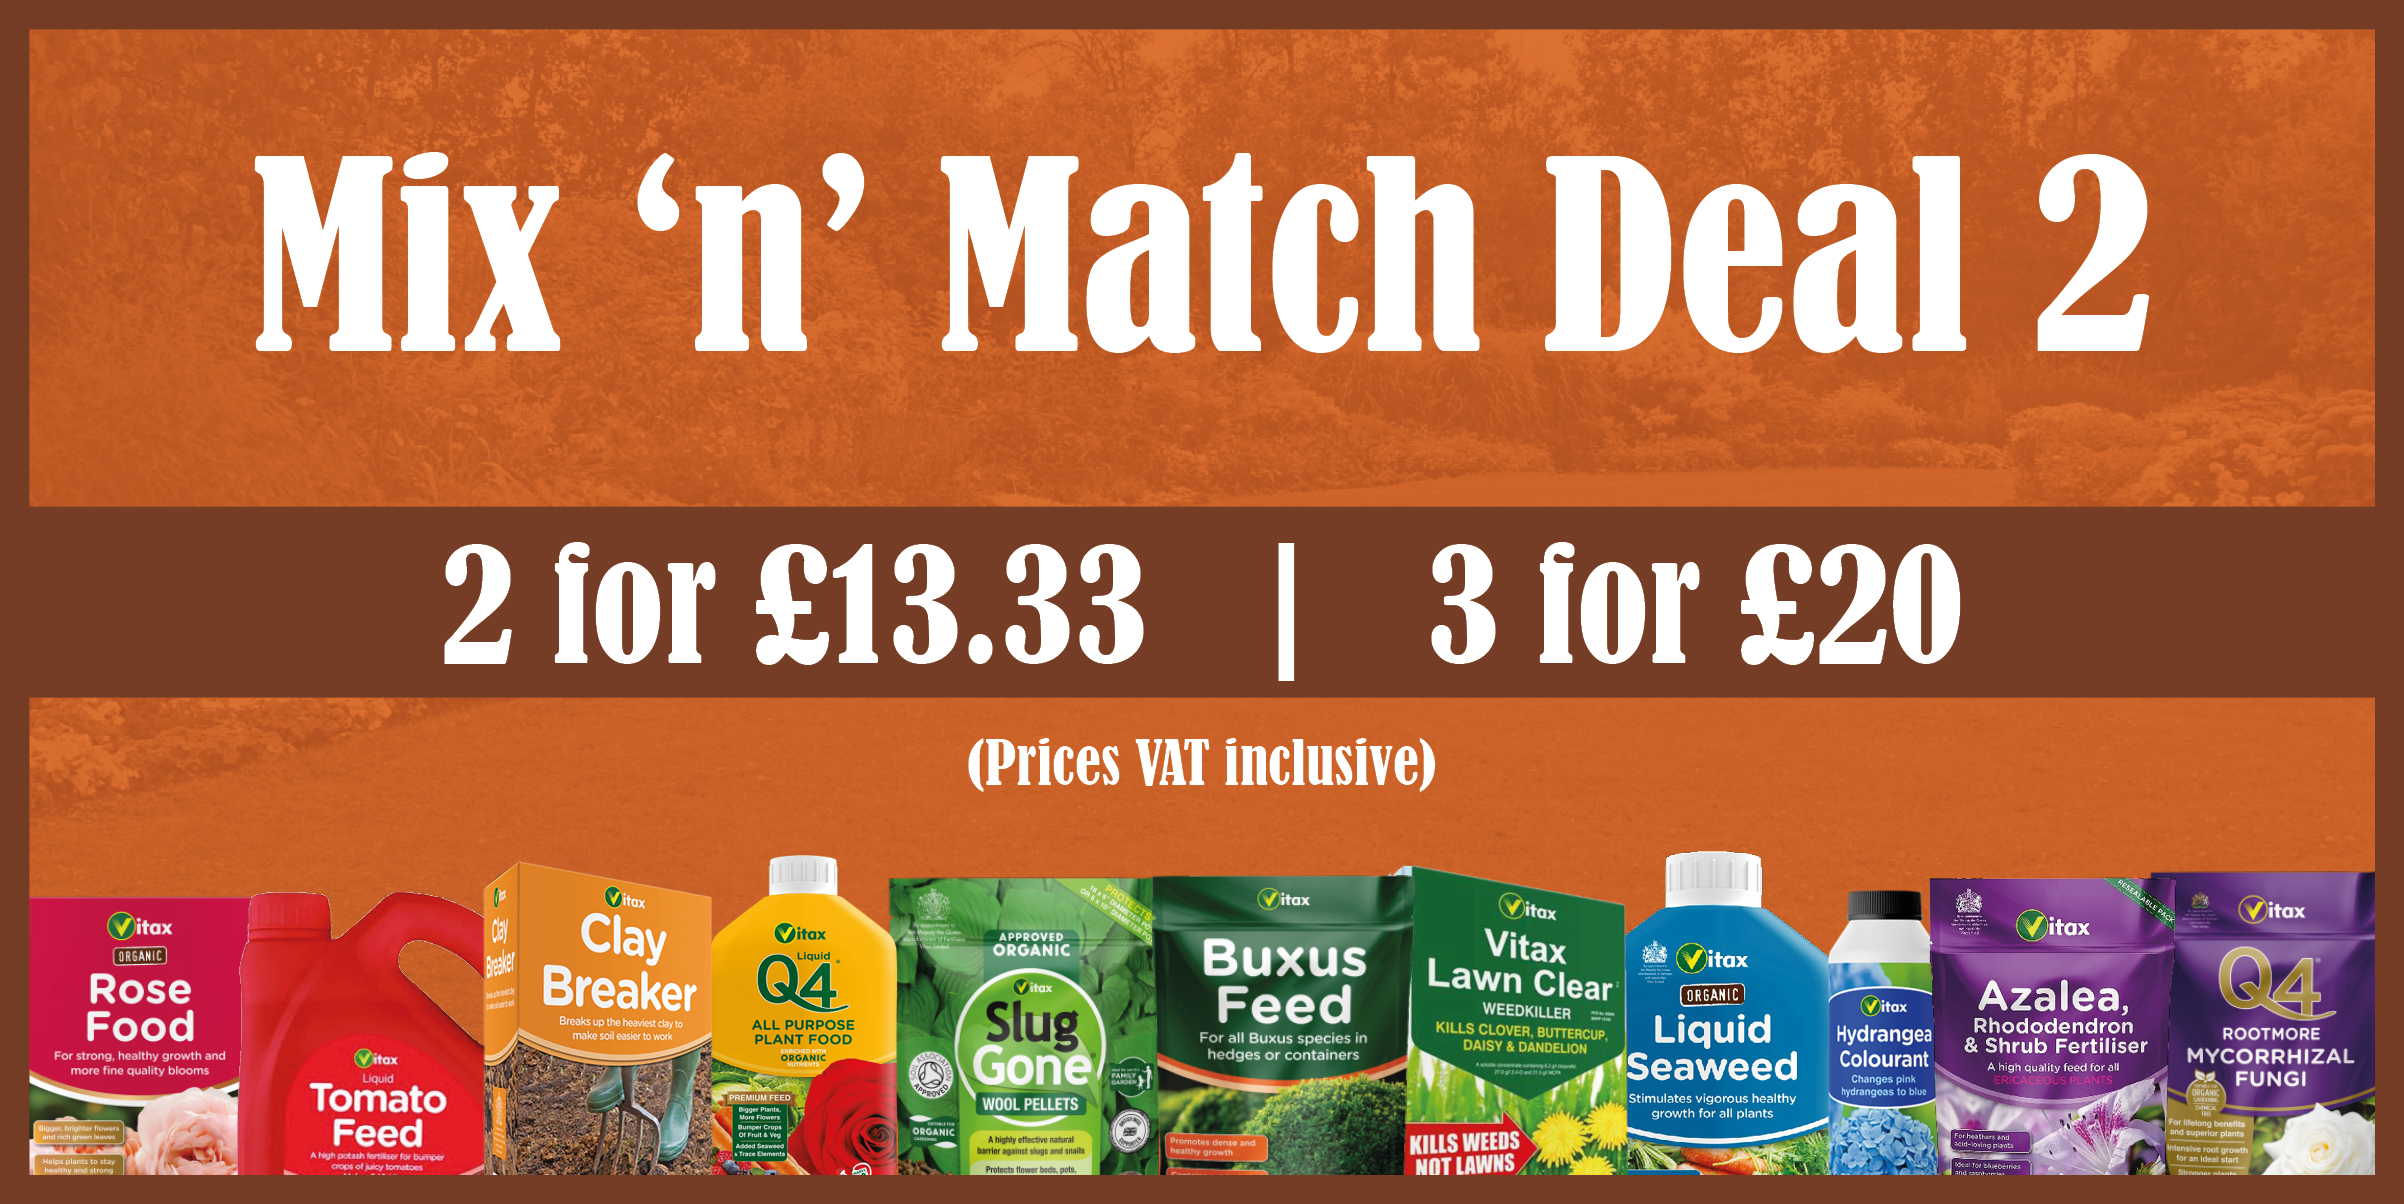 Mix and Match Deal 2